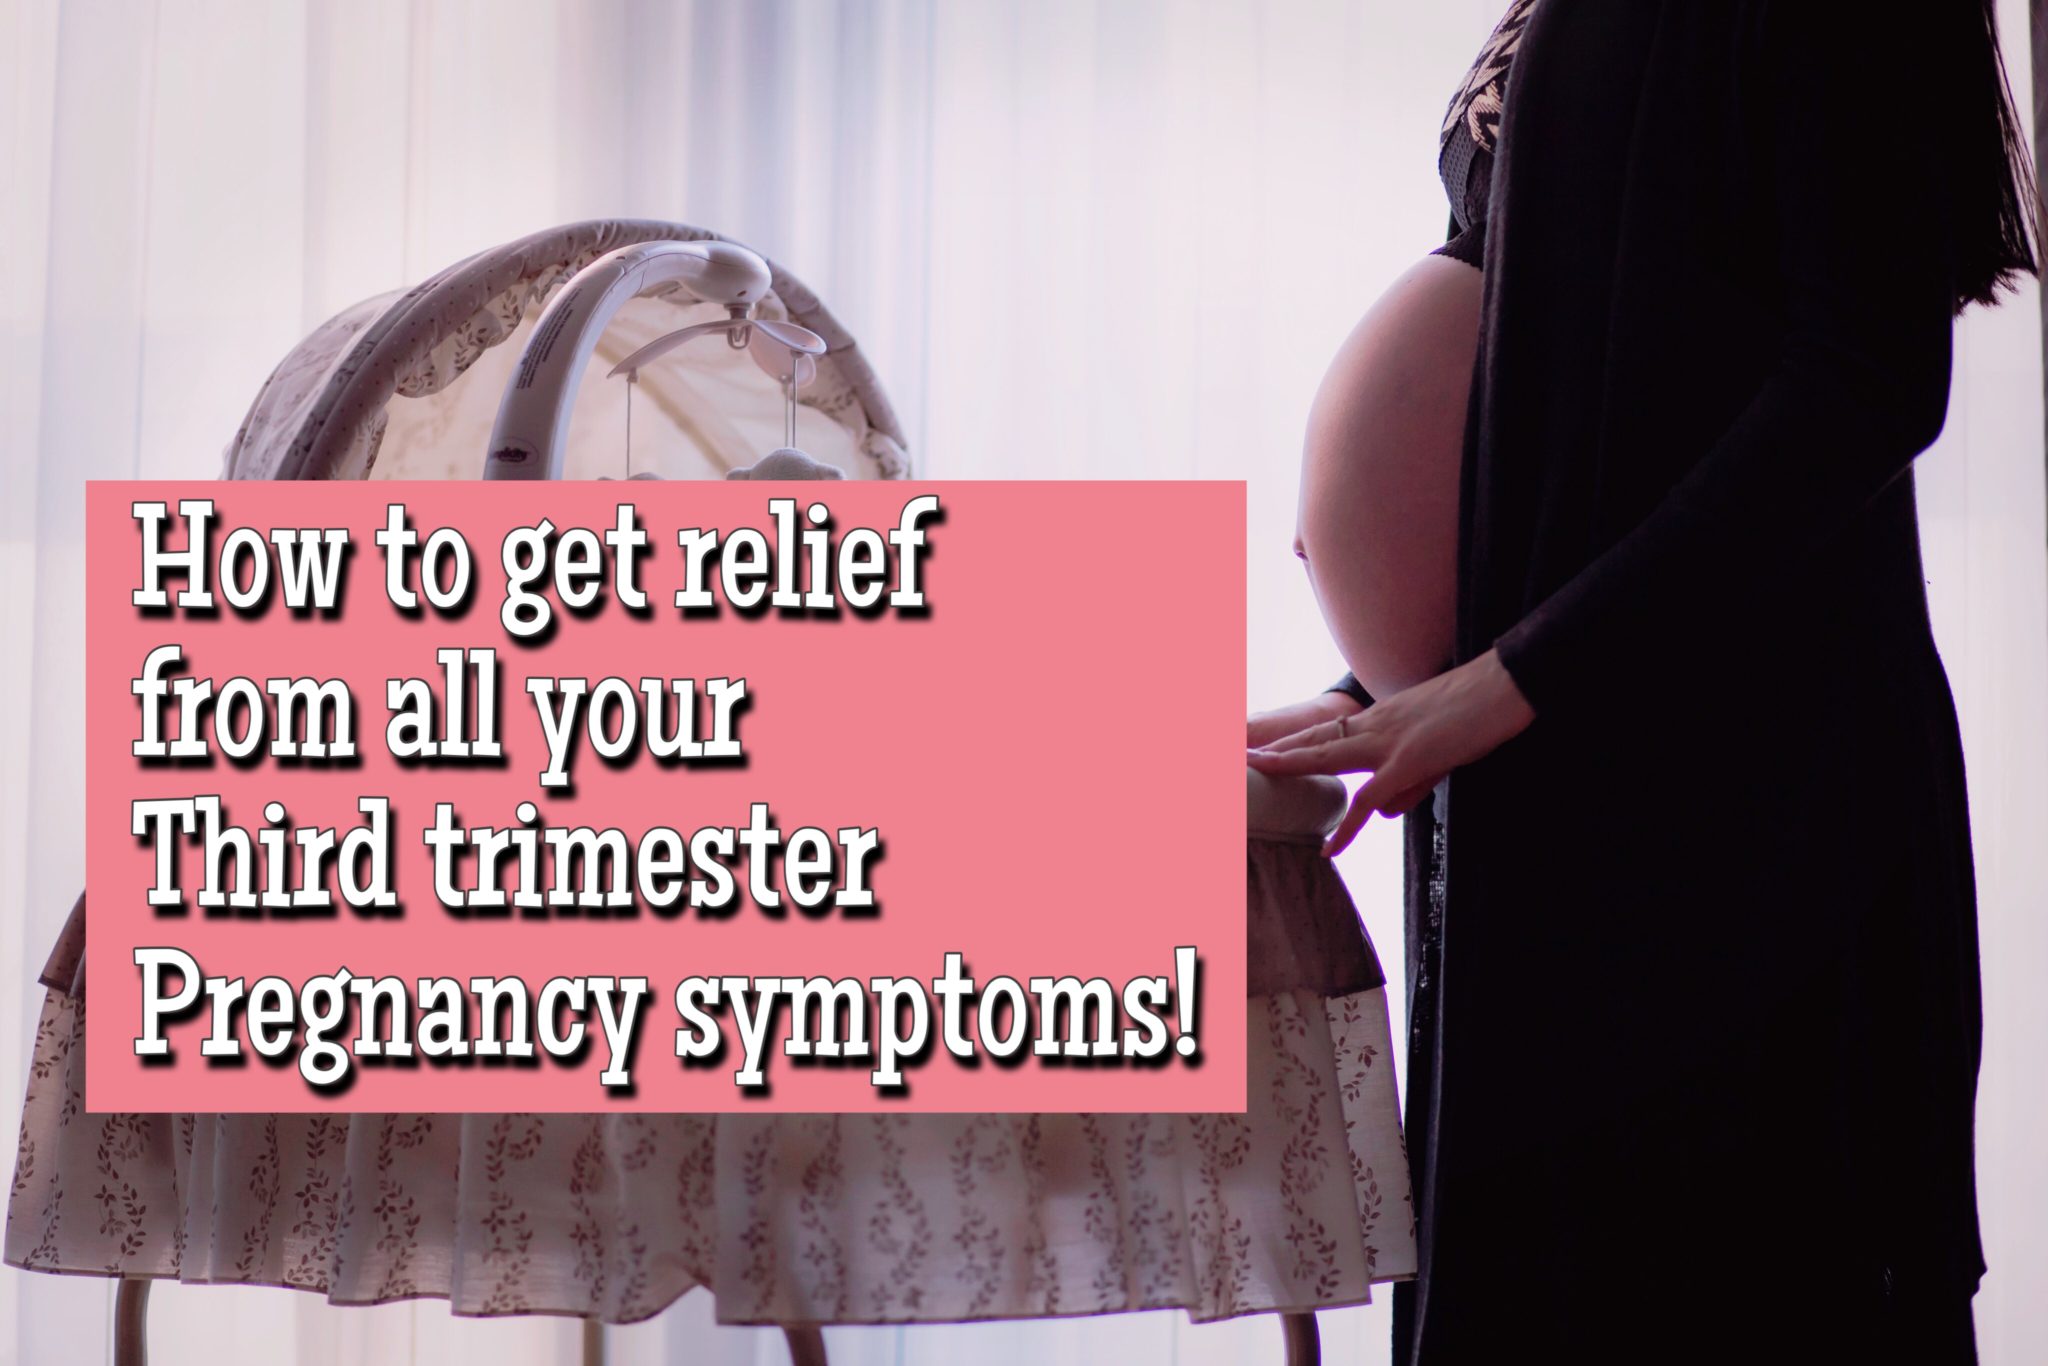 Third trimester pregnancy symptoms and how to relief them naturally. 